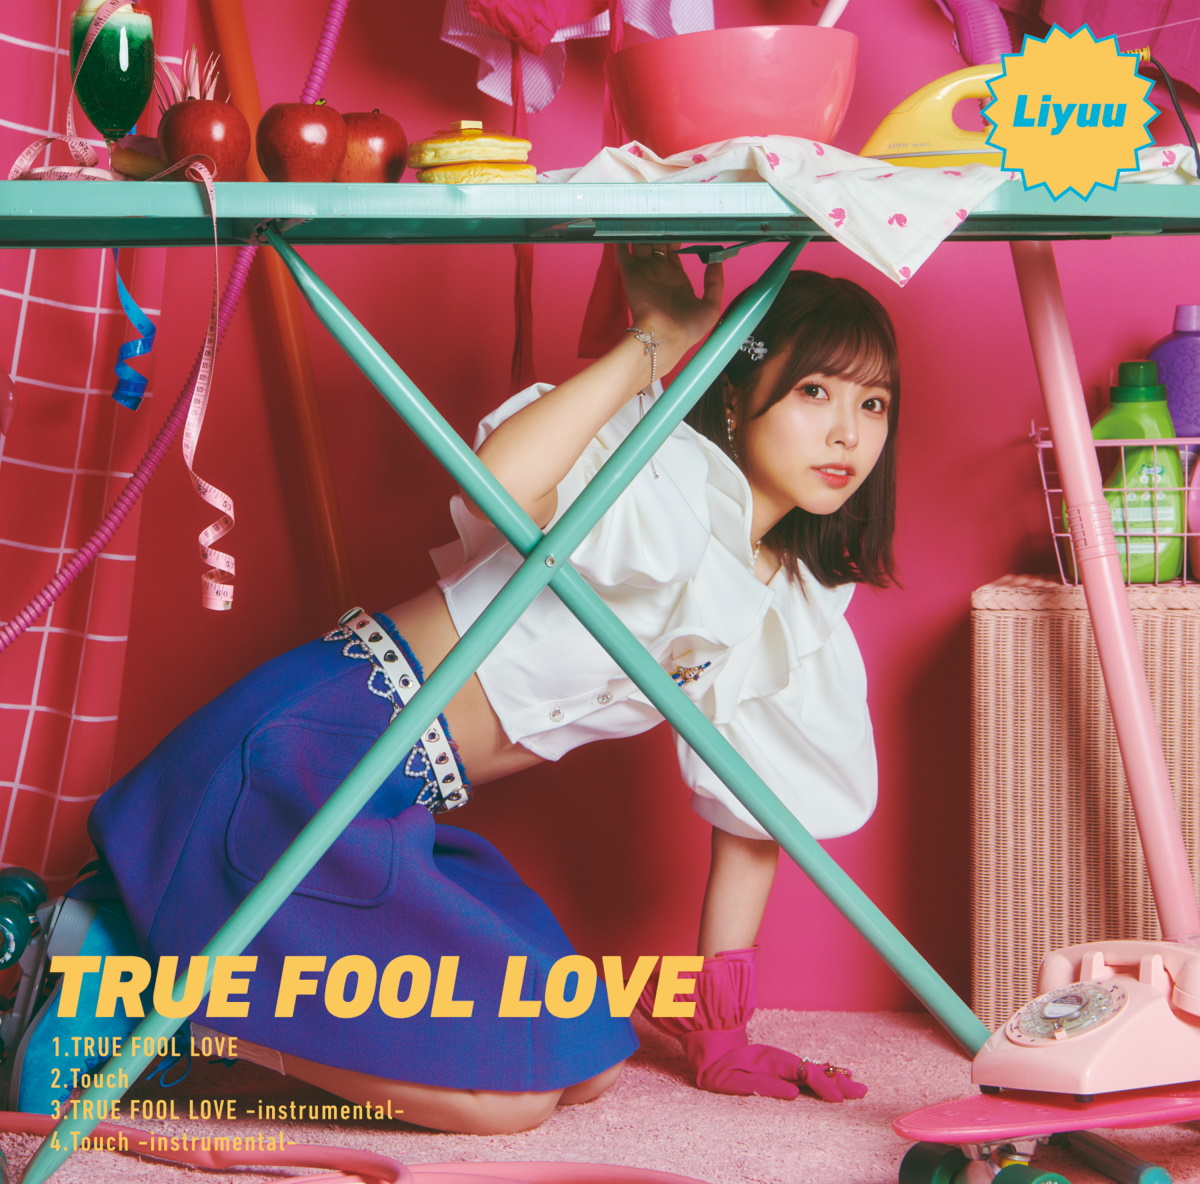 Cover art for『Liyuu - Touch』from the release『TRUE FOOL LOVE』